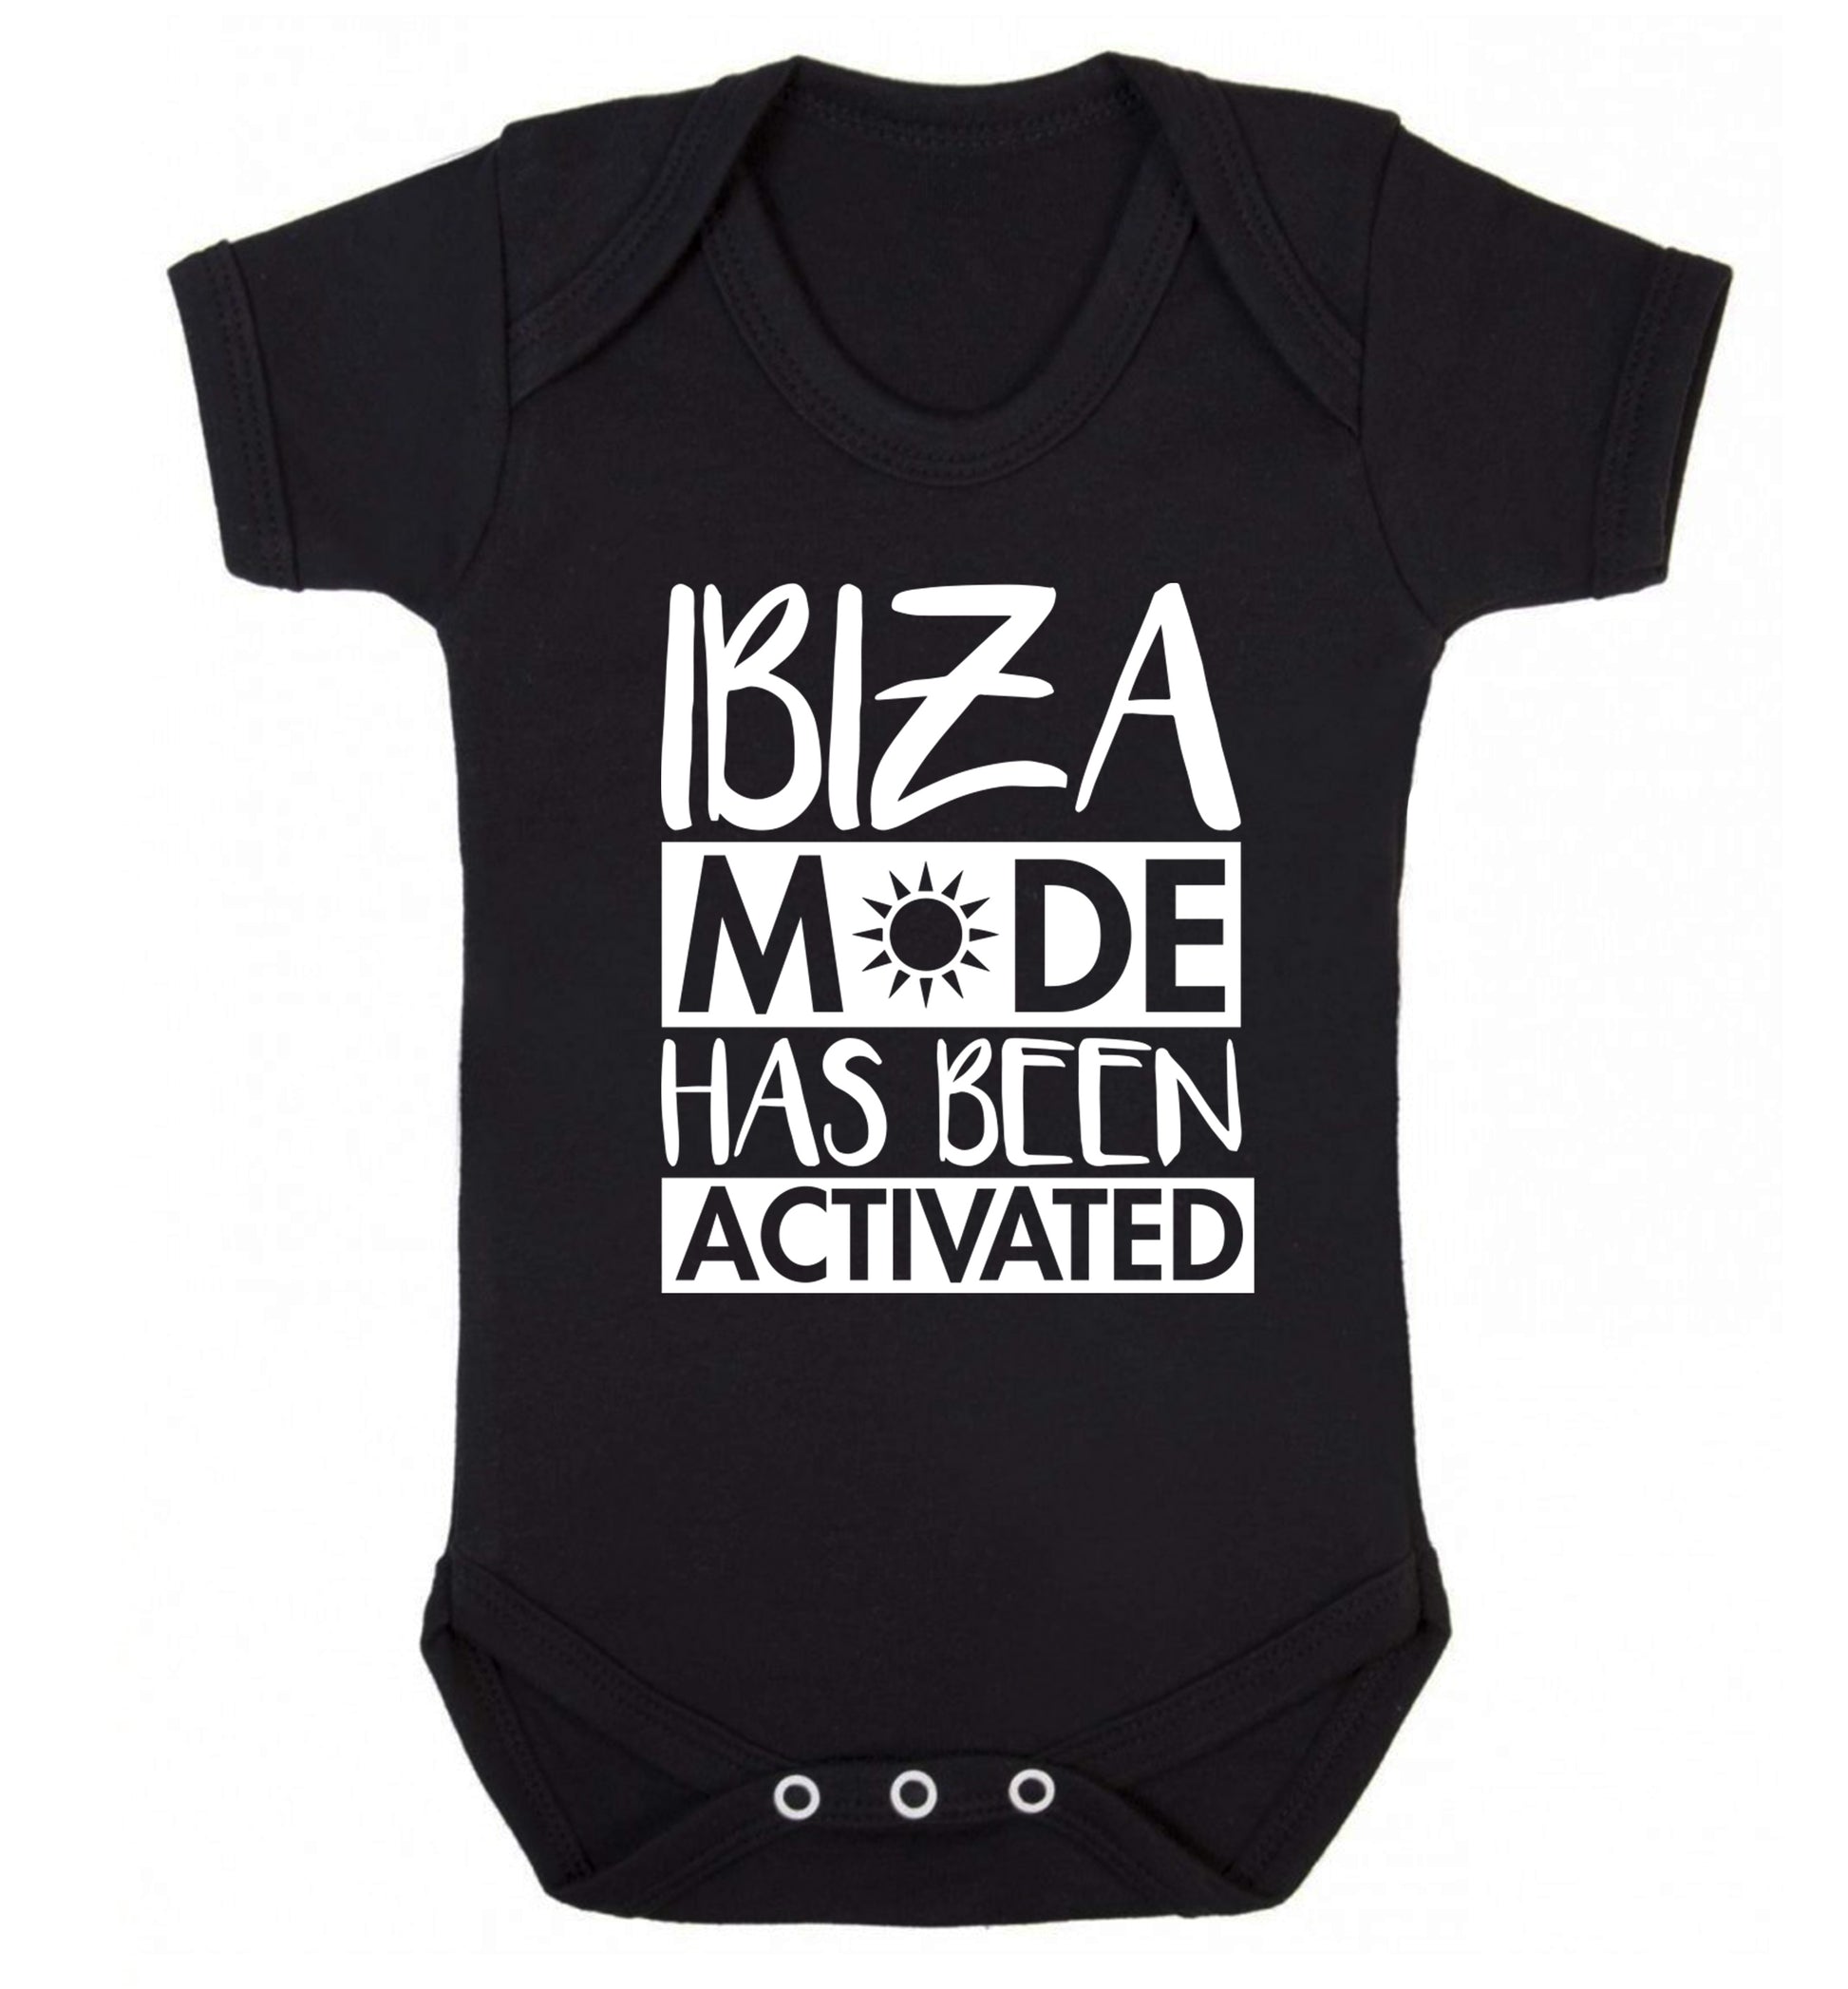 Ibiza mode has been activated Baby Vest black 18-24 months